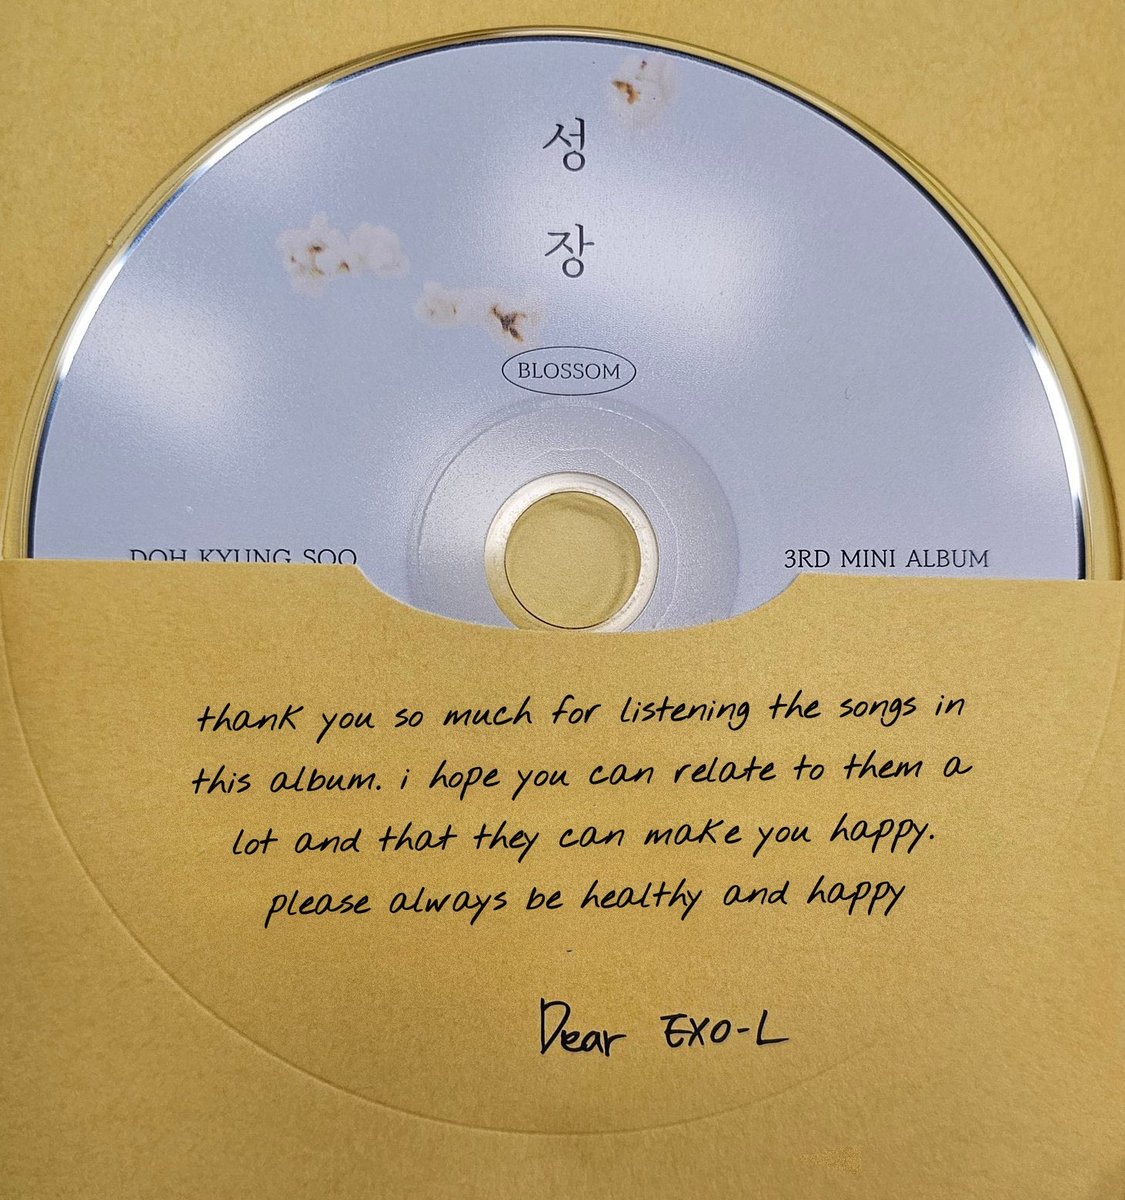 from kyungsoo, on his CD 💛